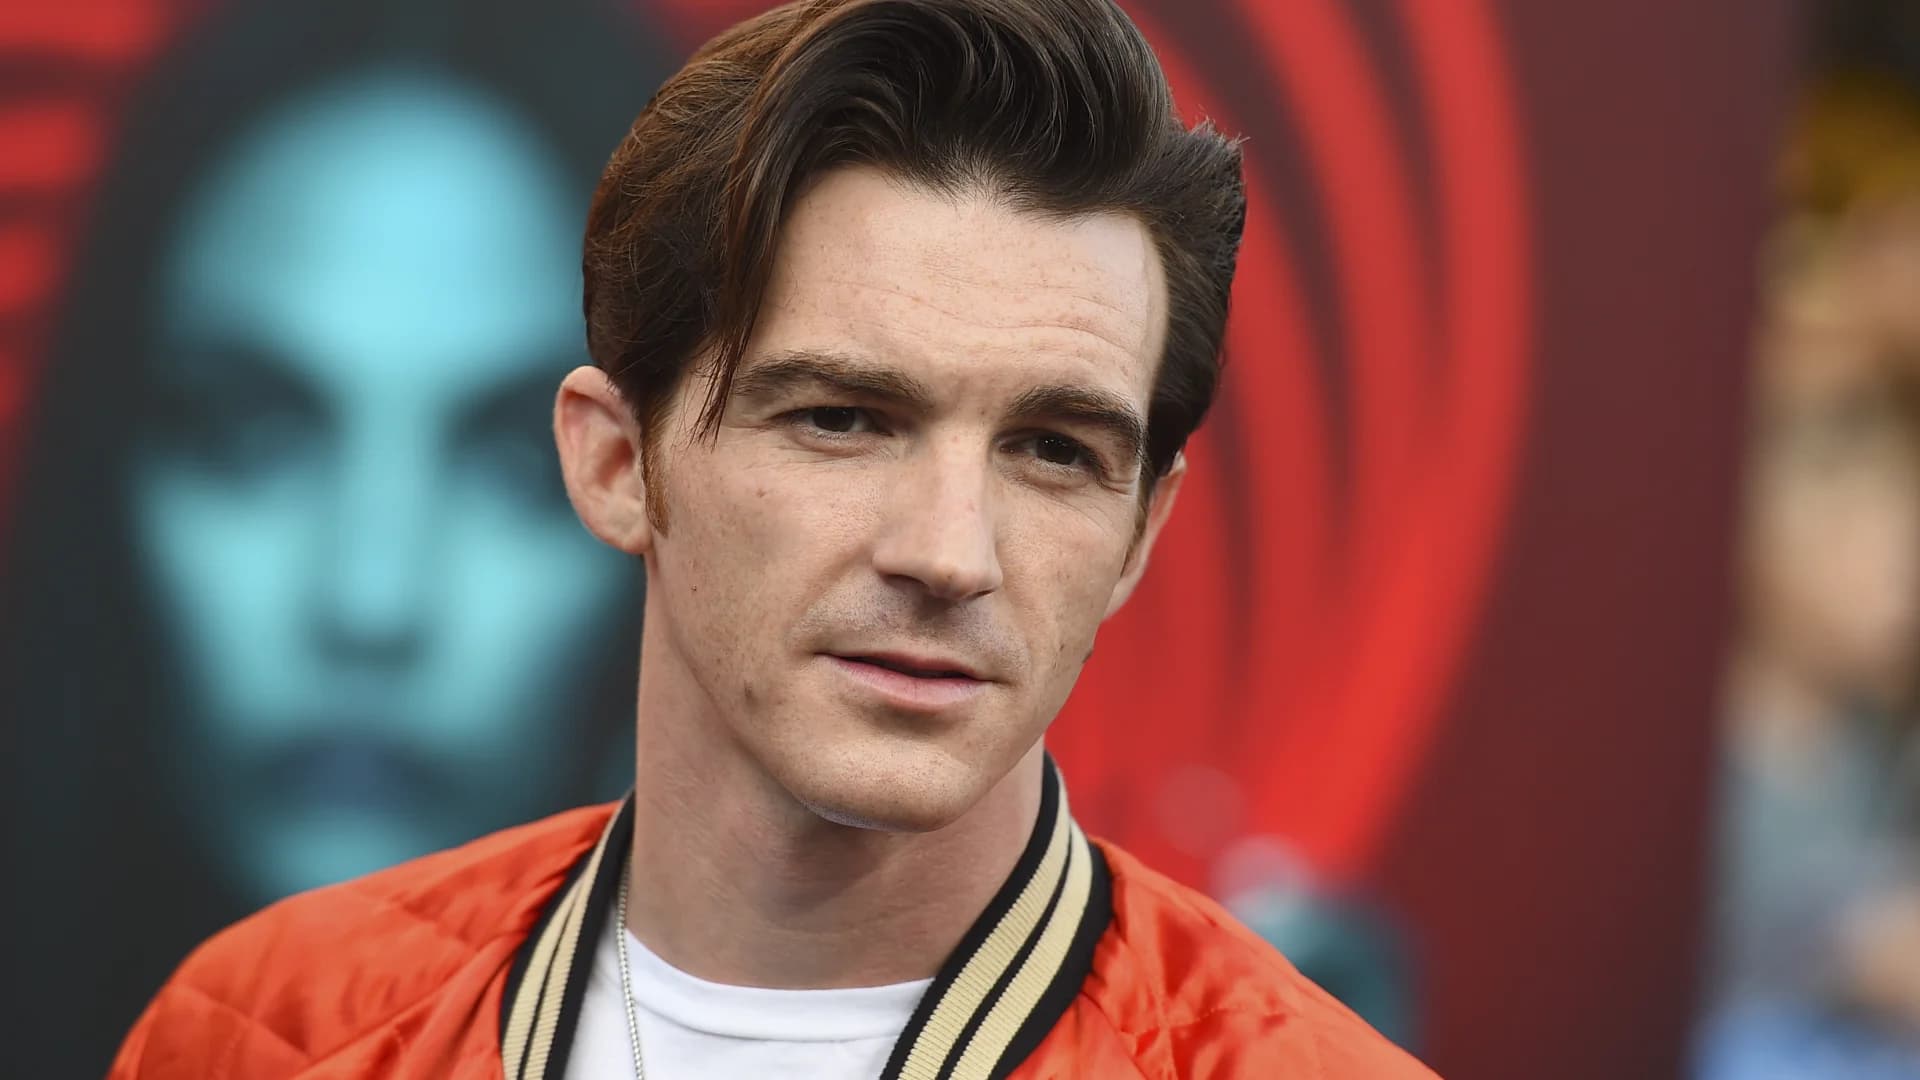 Actor Drake Bell found safe after being declared missing